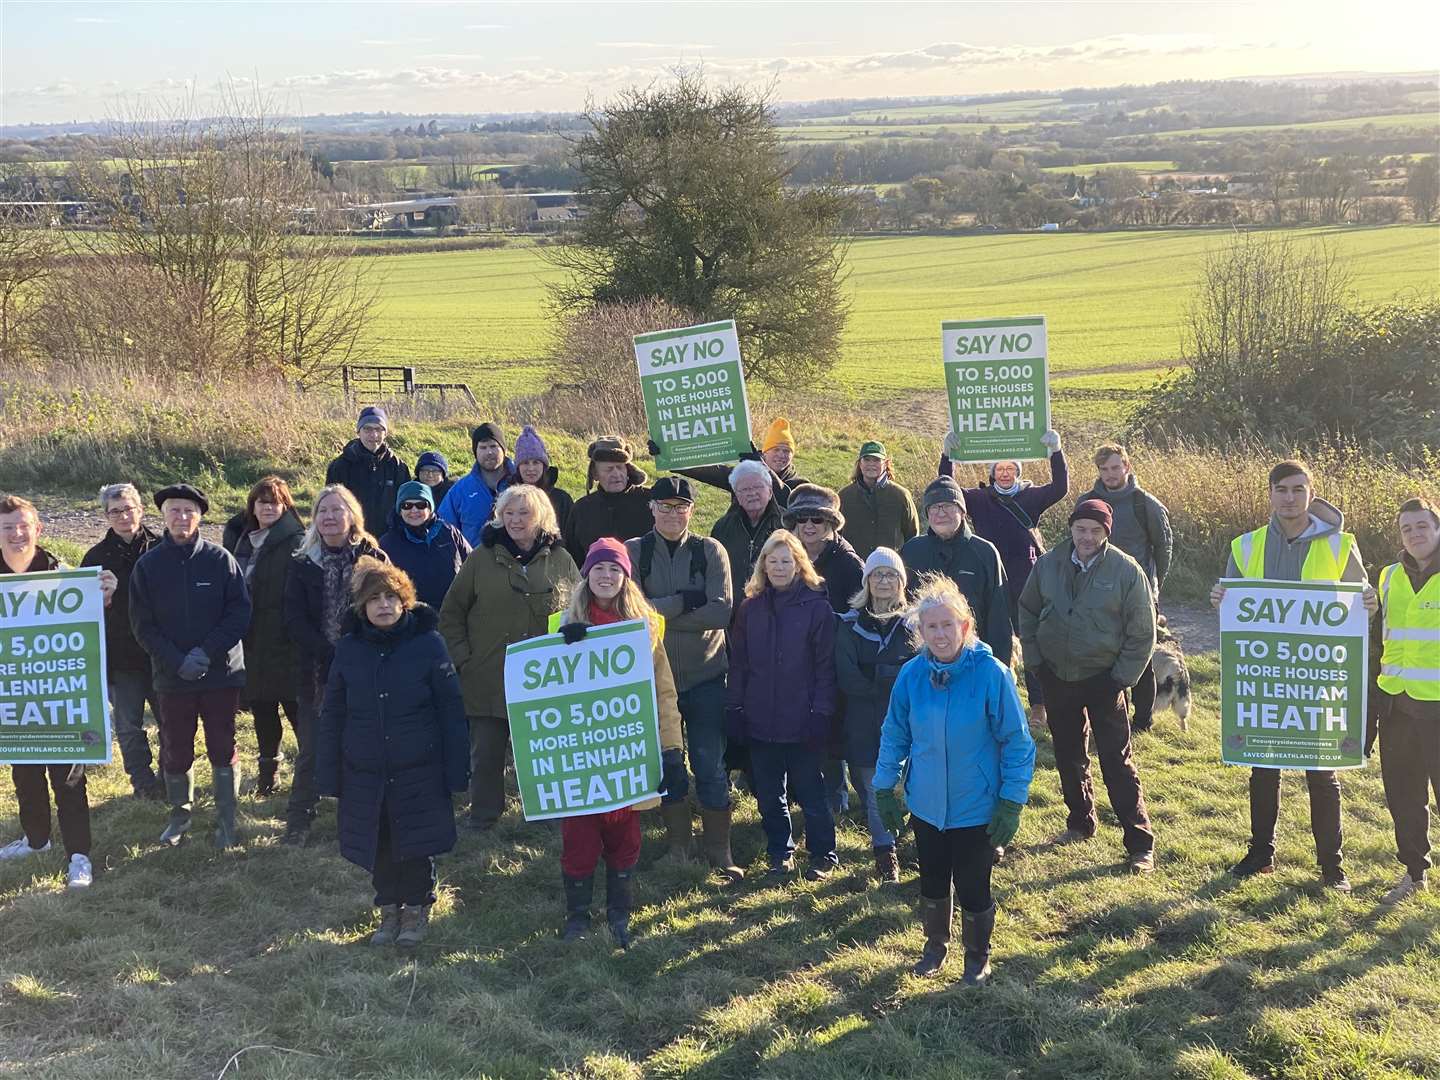 Protesters opposed to the Heathlands scheme